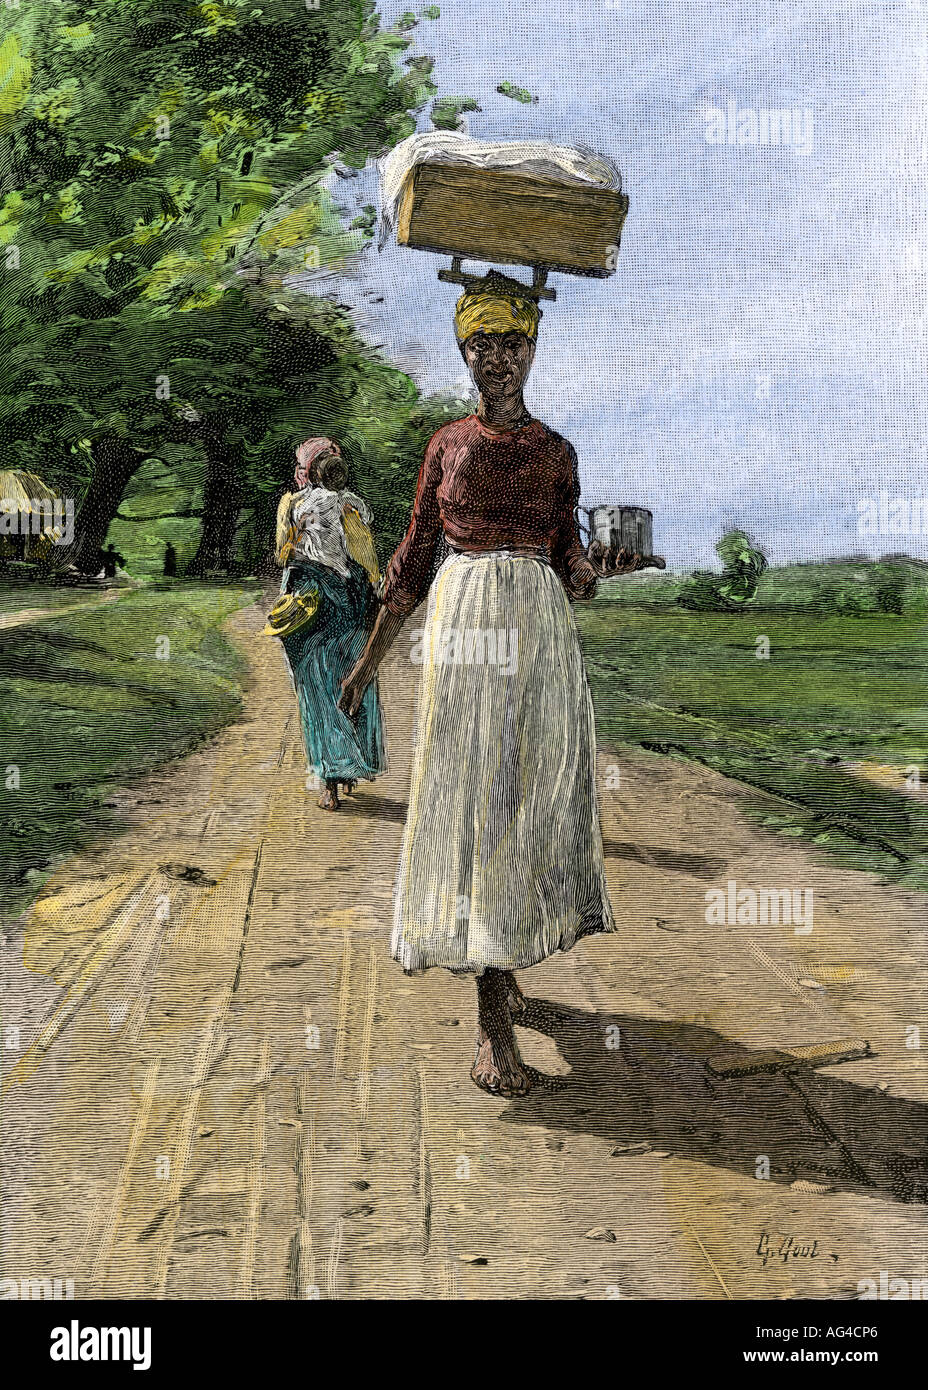 Jamaica woman on her way to market 1890s. Hand-colored halftone of an illustration Stock Photo